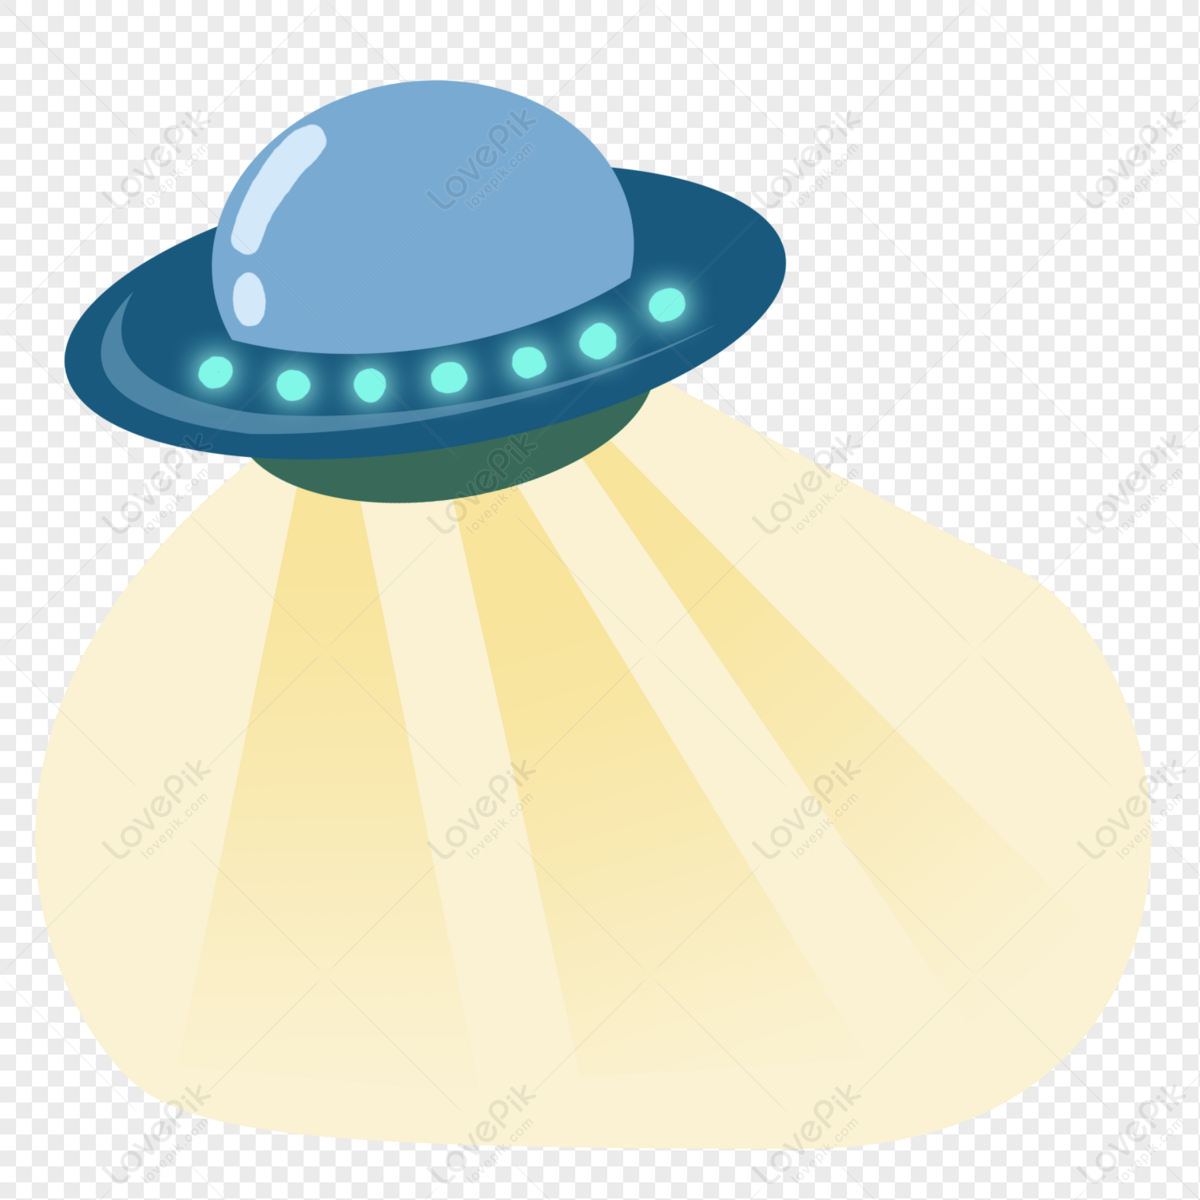 Cute Alien Flying Saucer PNG Image And Clipart Image For Free ...